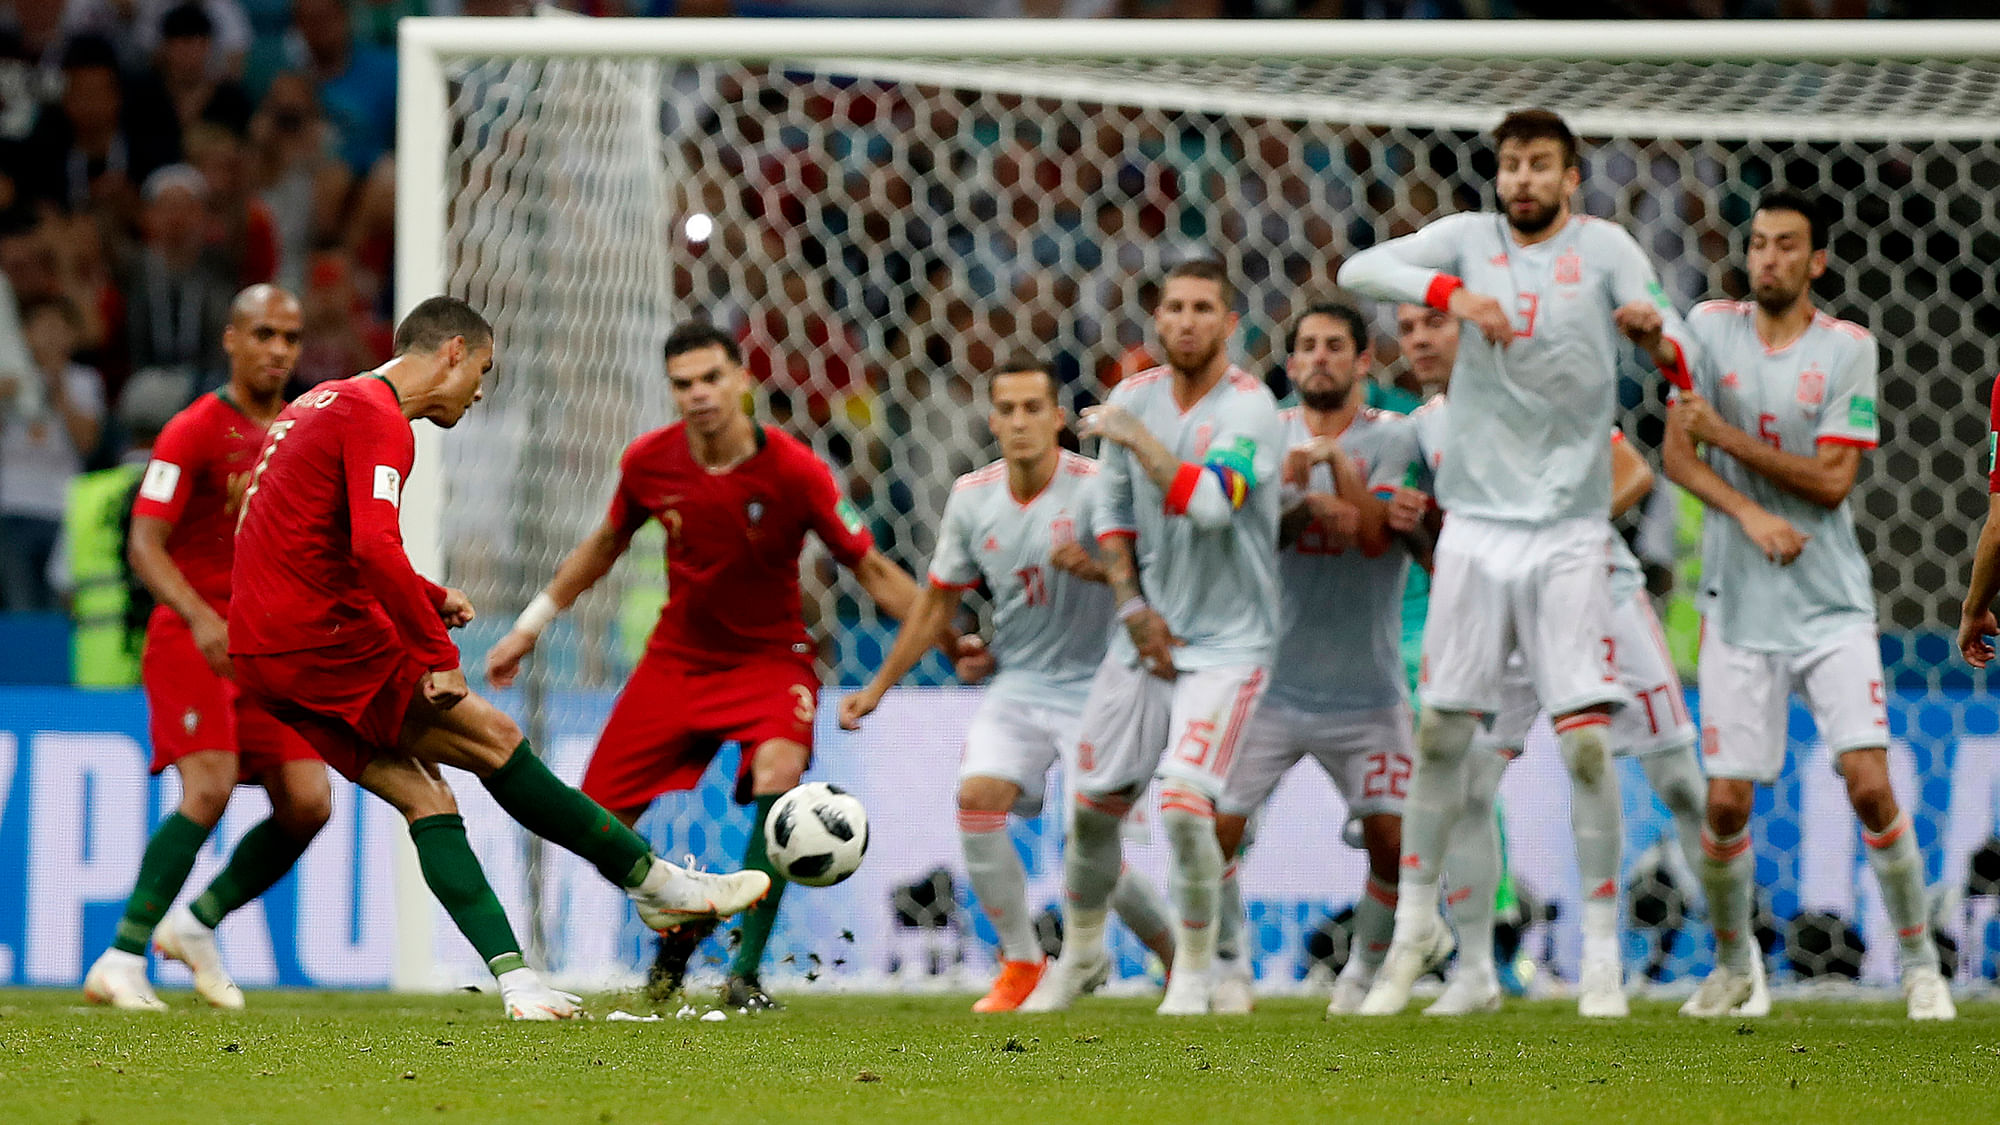 Portugal’s Cristiano Ronaldo, left, scores his side’s equalizing goal during the group B match between Portugal and Spain at the 2018 soccer World Cup in the Fisht Stadium in Sochi, Russia, Friday, June 15, 2018.